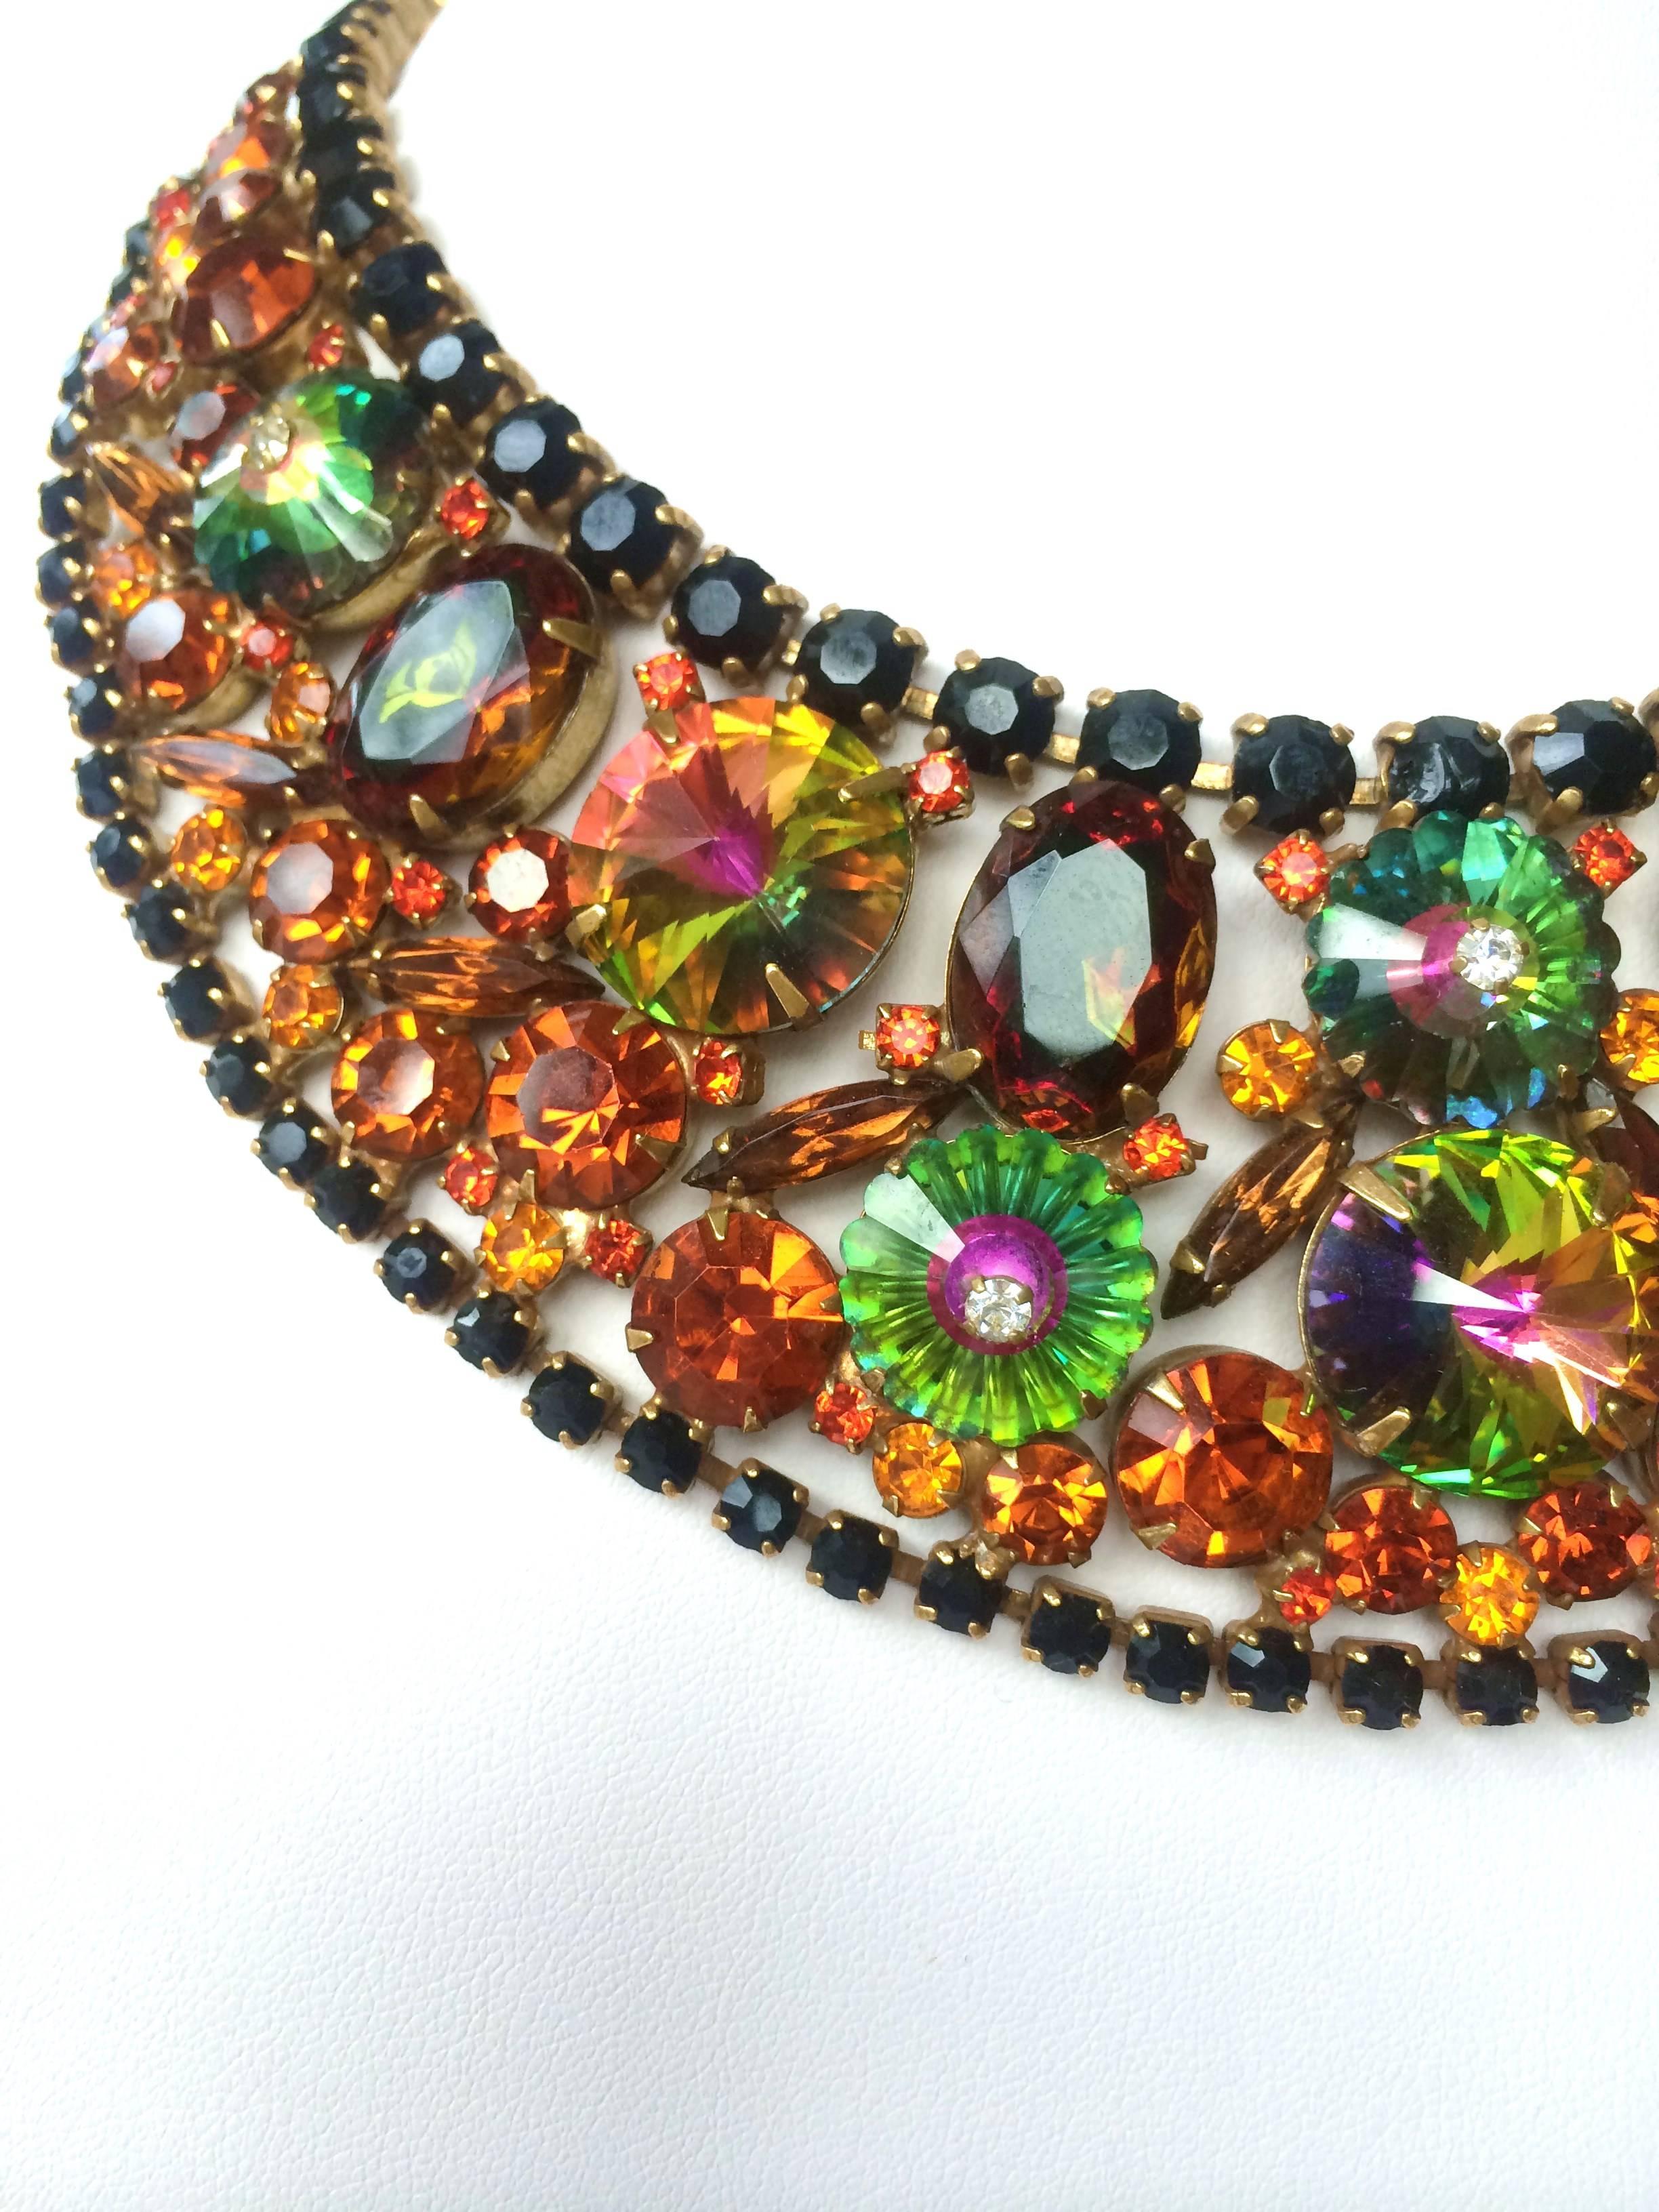 A firework display for the neck! This is a wonderful collar dating from the late sixties. Made in the USA and designed by William DeLizza. The company D&E with Delizza as head designer and Harold Eisner made jewellery for many companies but the